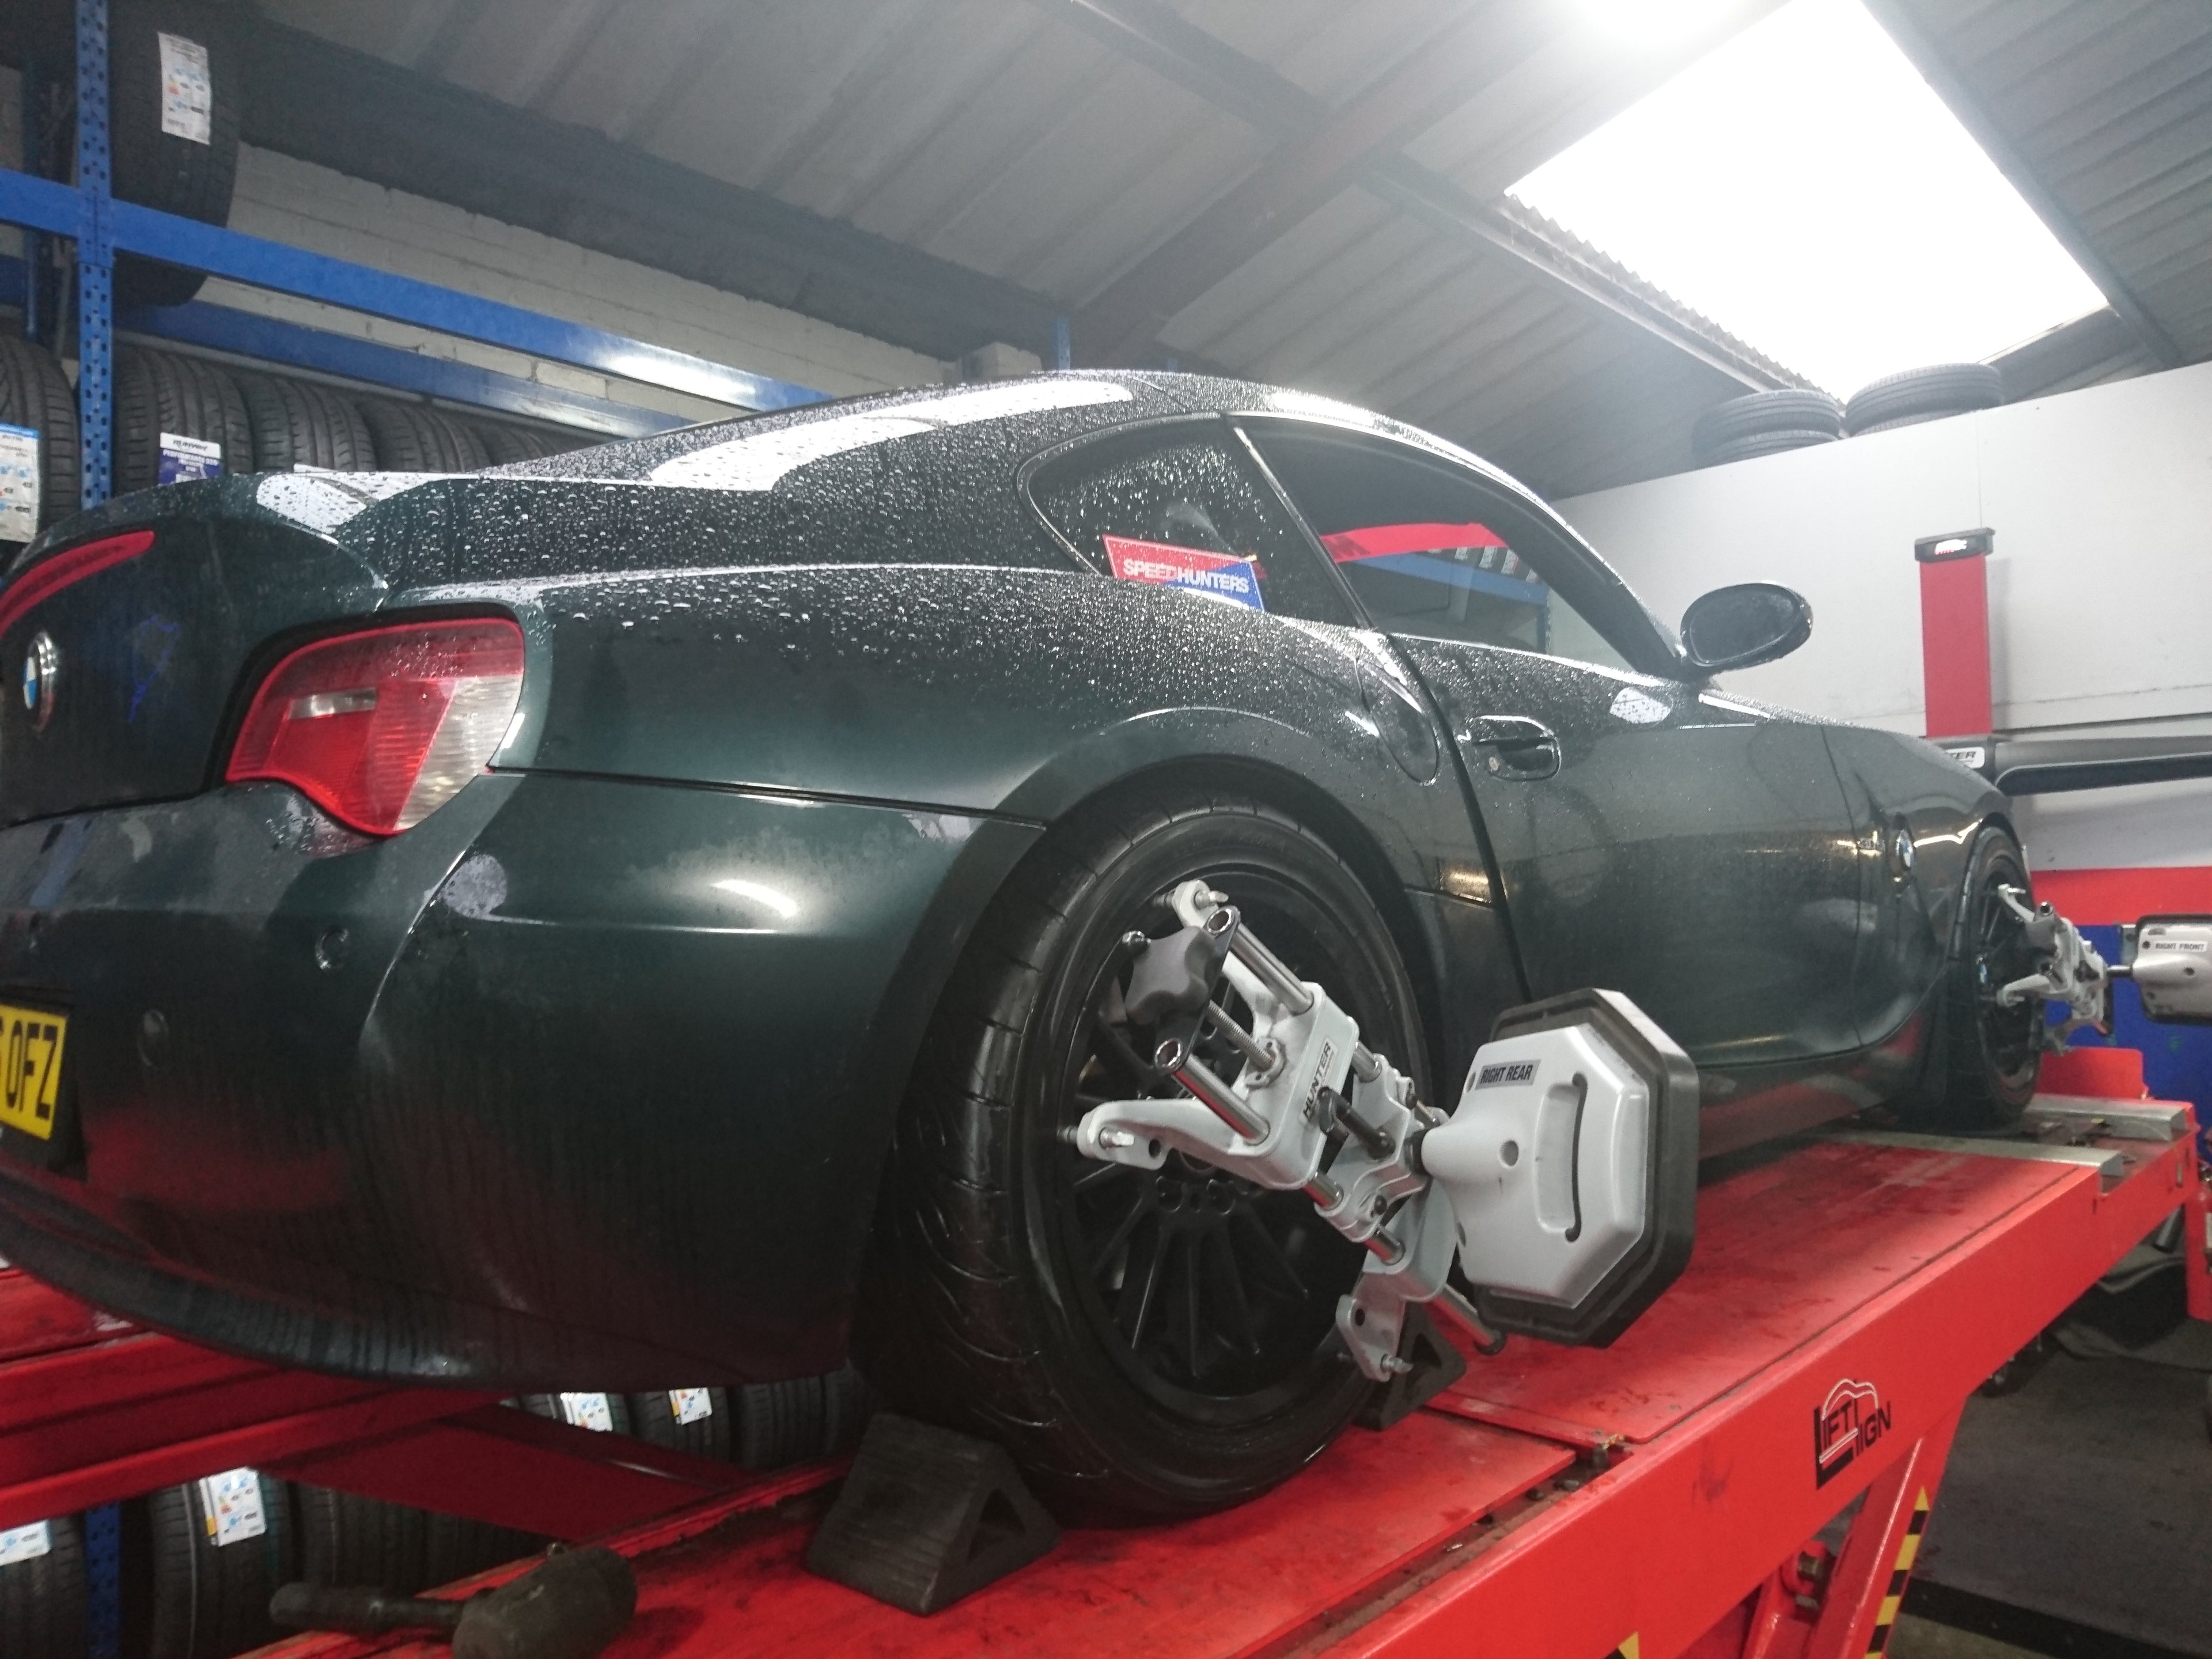 BMW Z4 Coupe Track Toy Build - Page 1 - Readers' Cars - PistonHeads